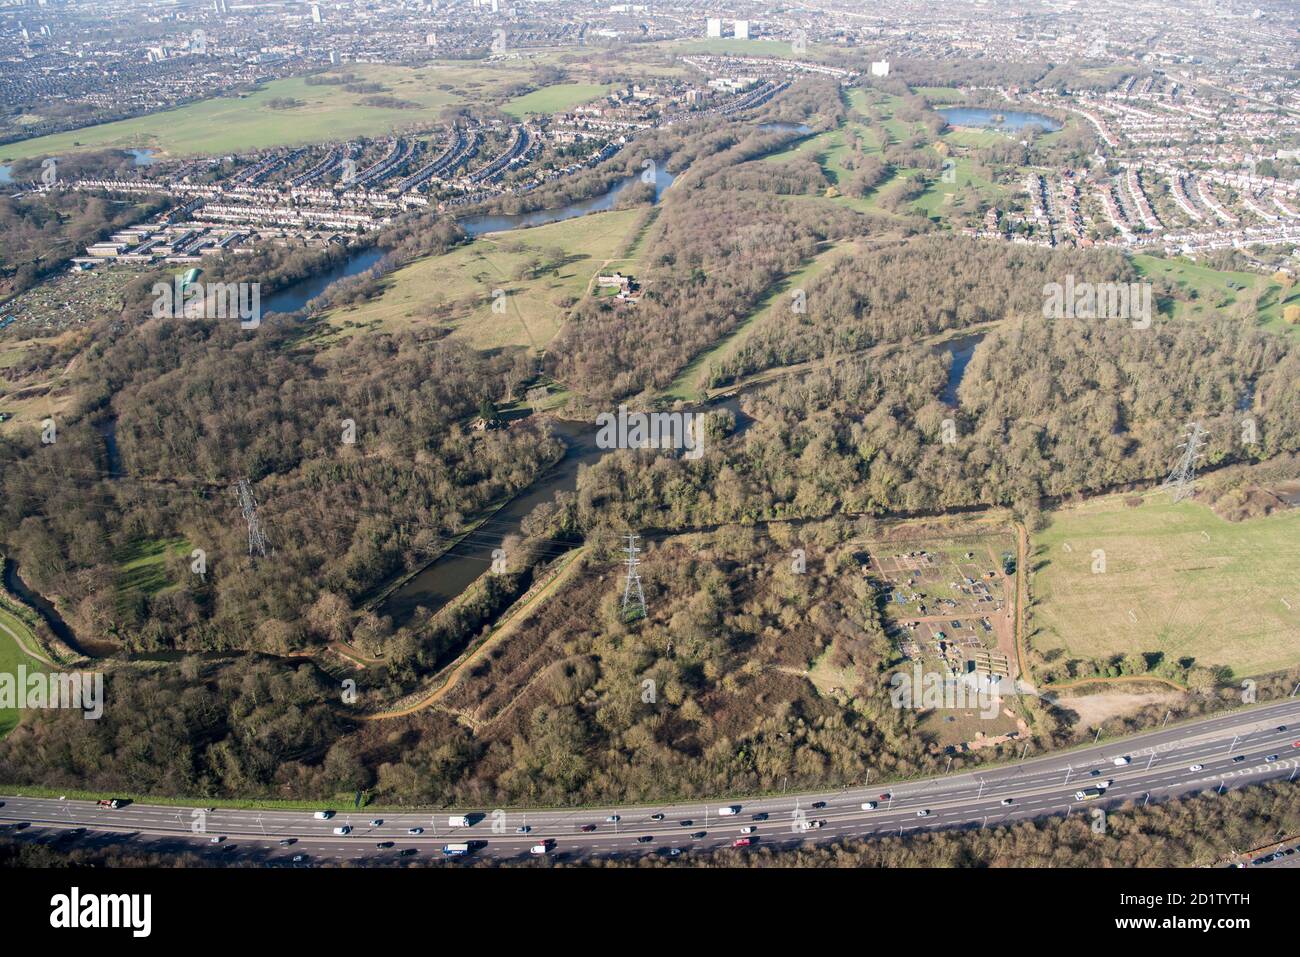 Wanstead Park, created from a deer park with a series of relandscaping including extensive changes 1813-18 that were designed by Humphry Repton, Wanstead Park, London, 2018, UK. Aerial view. Stock Photo